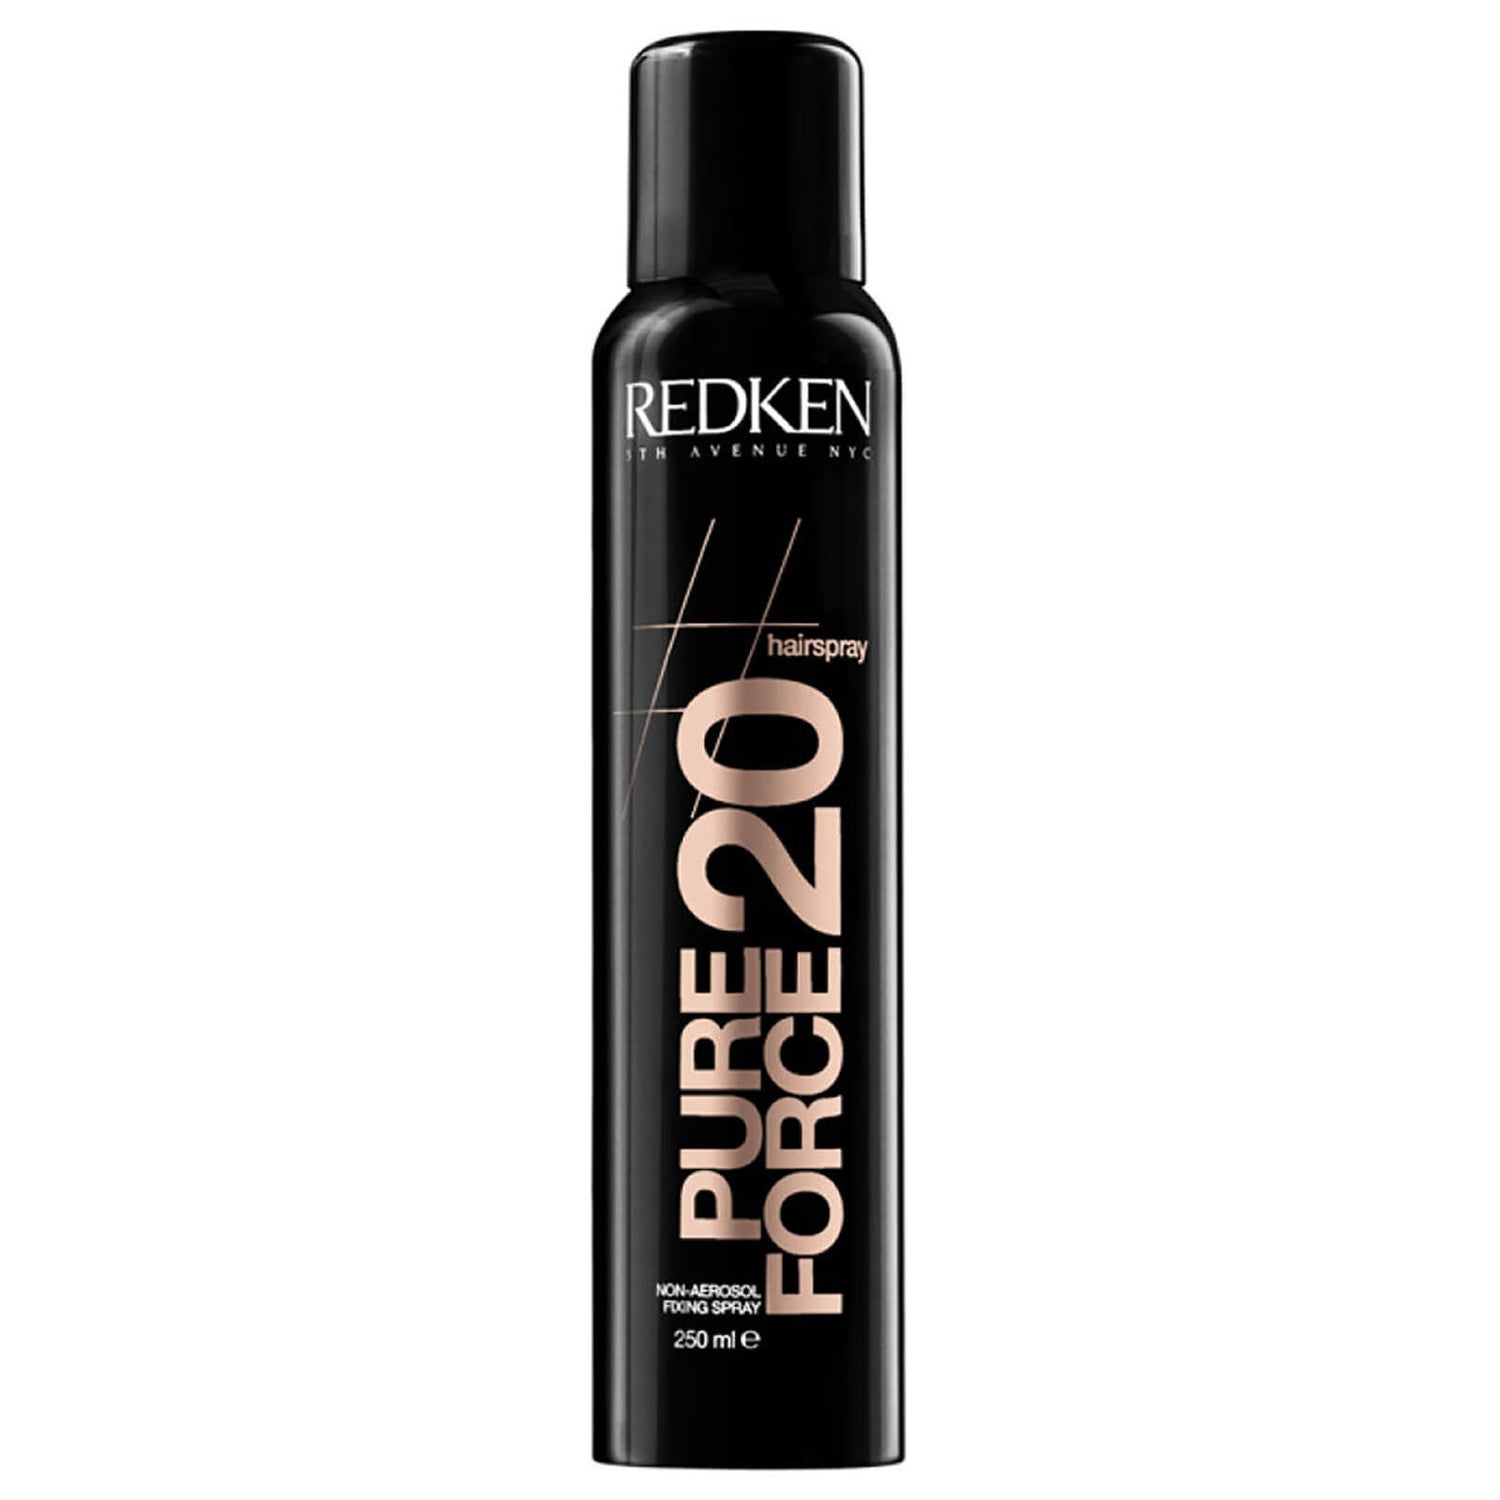 Redken Pure Force 20 (250ml)